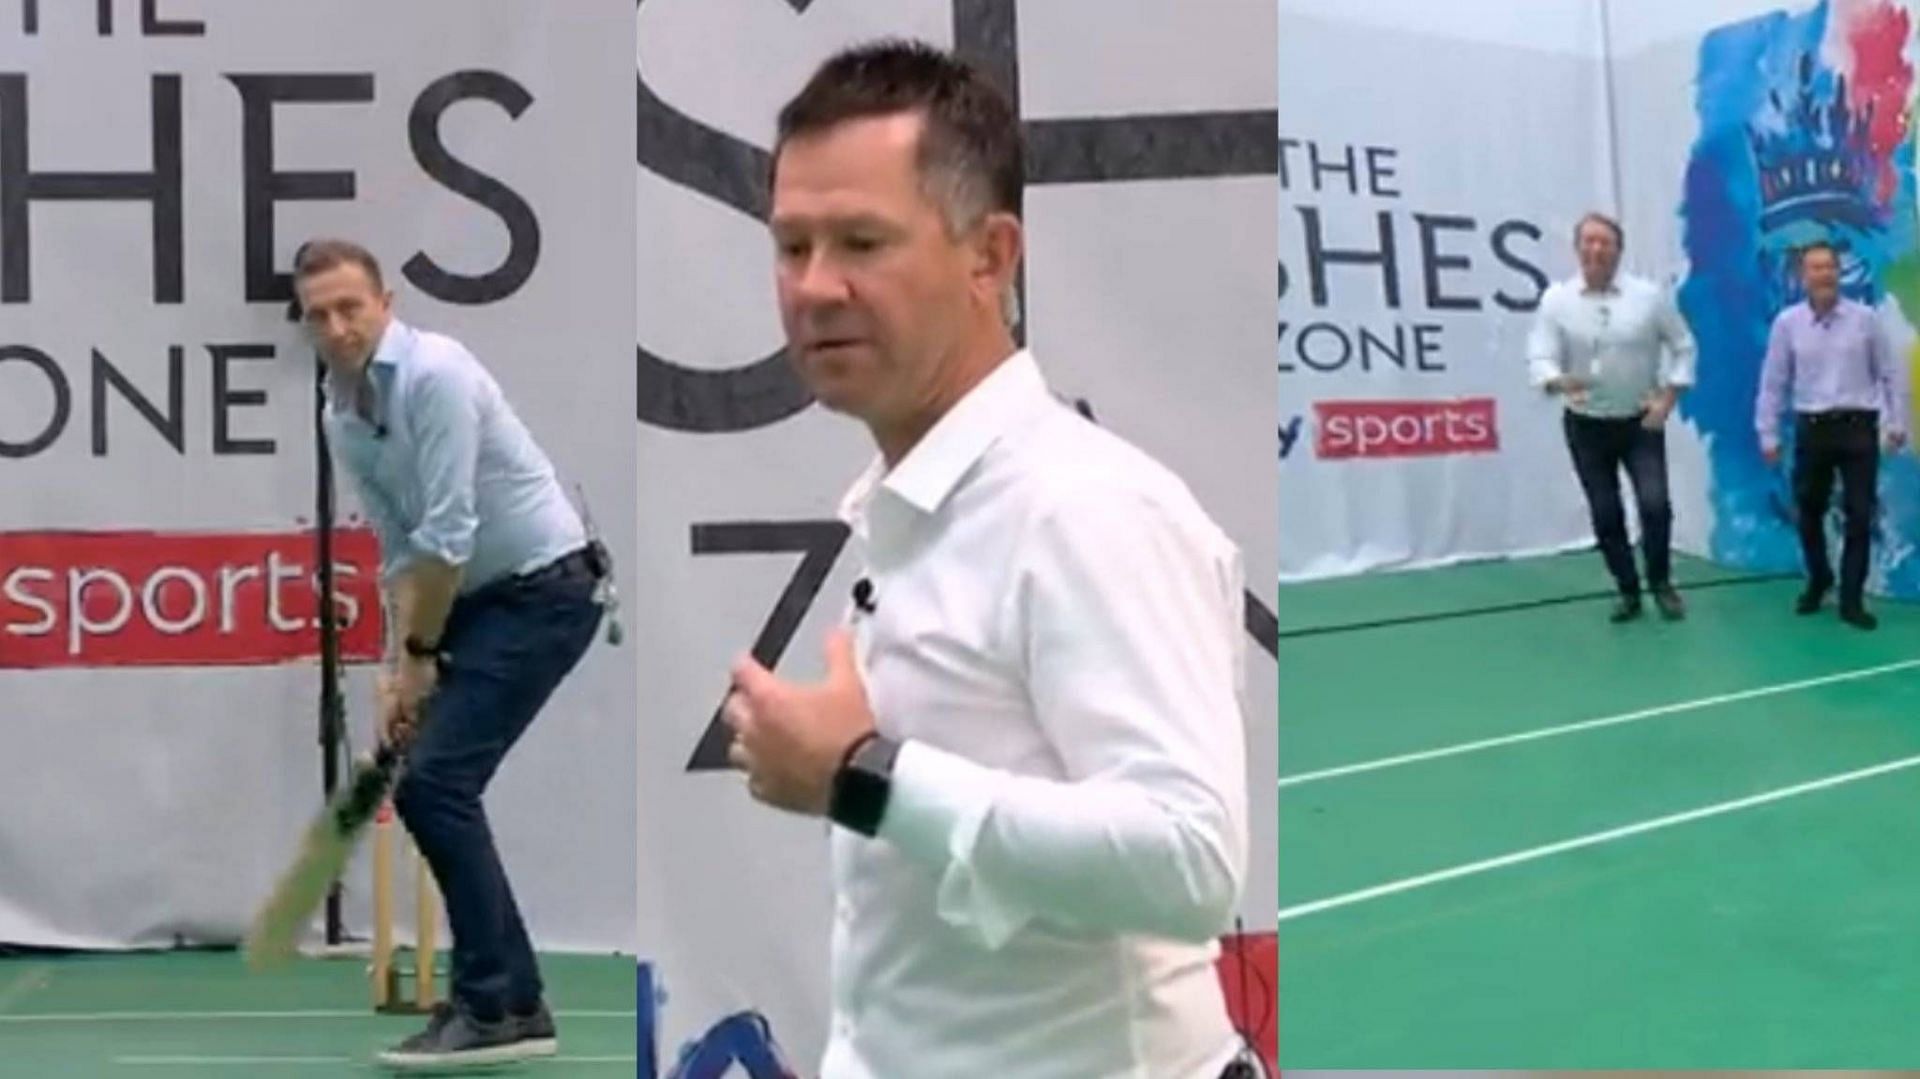 The 3 legends of cricket had some fun in the Ashes zone (Image: Sky Sports/Twitter)